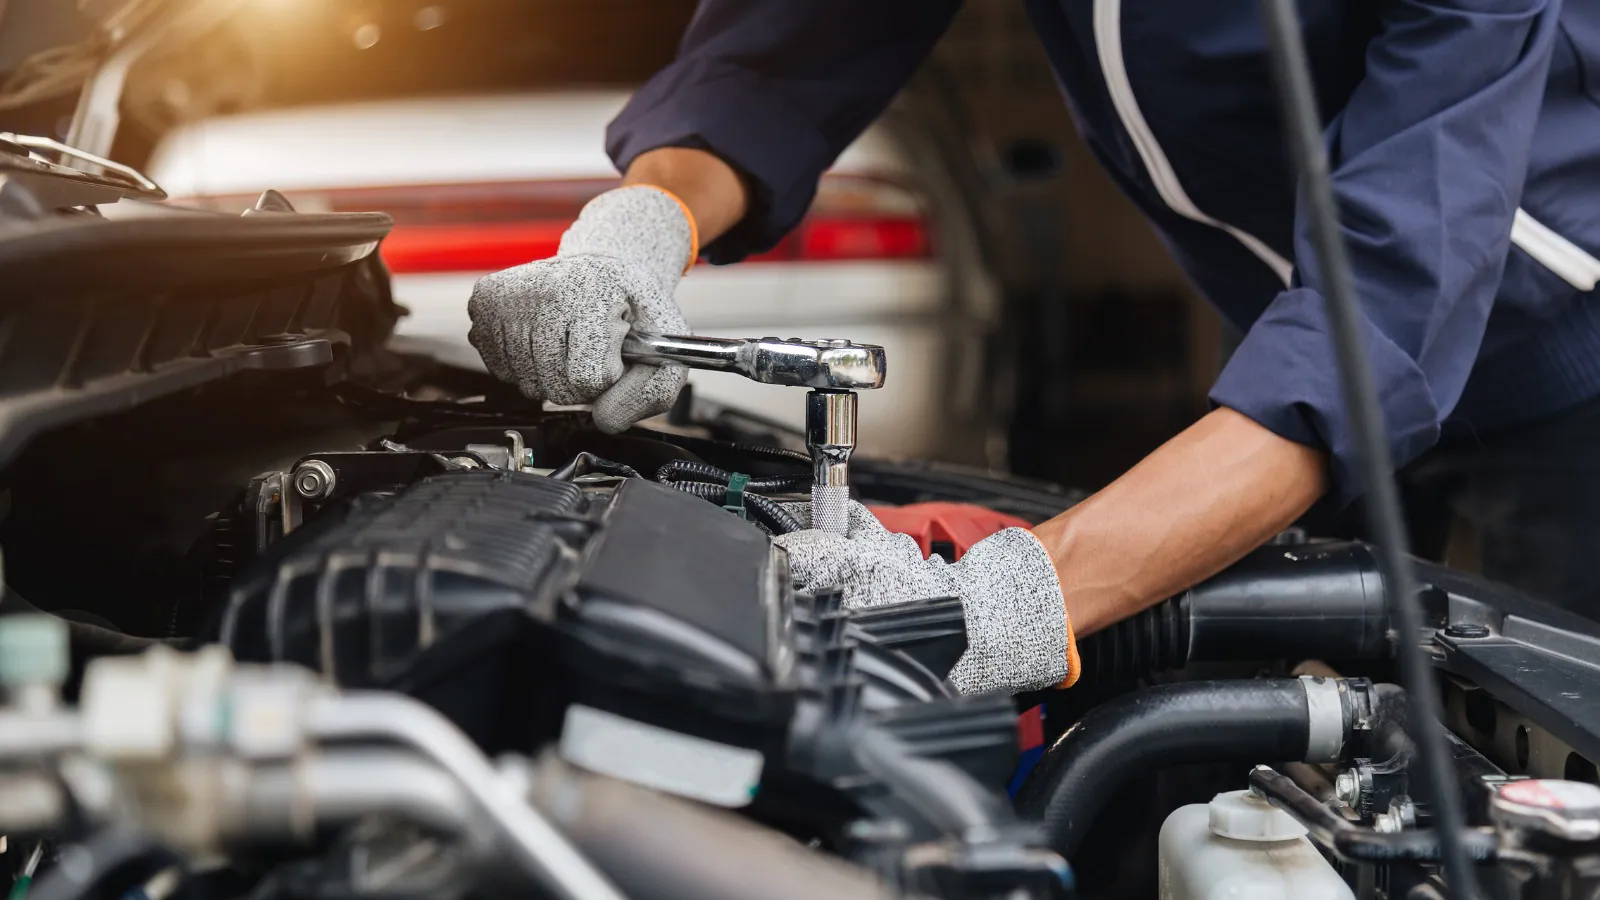 The Complete Guide to Car Maintenance: What Services Your Vehicle Needs and When